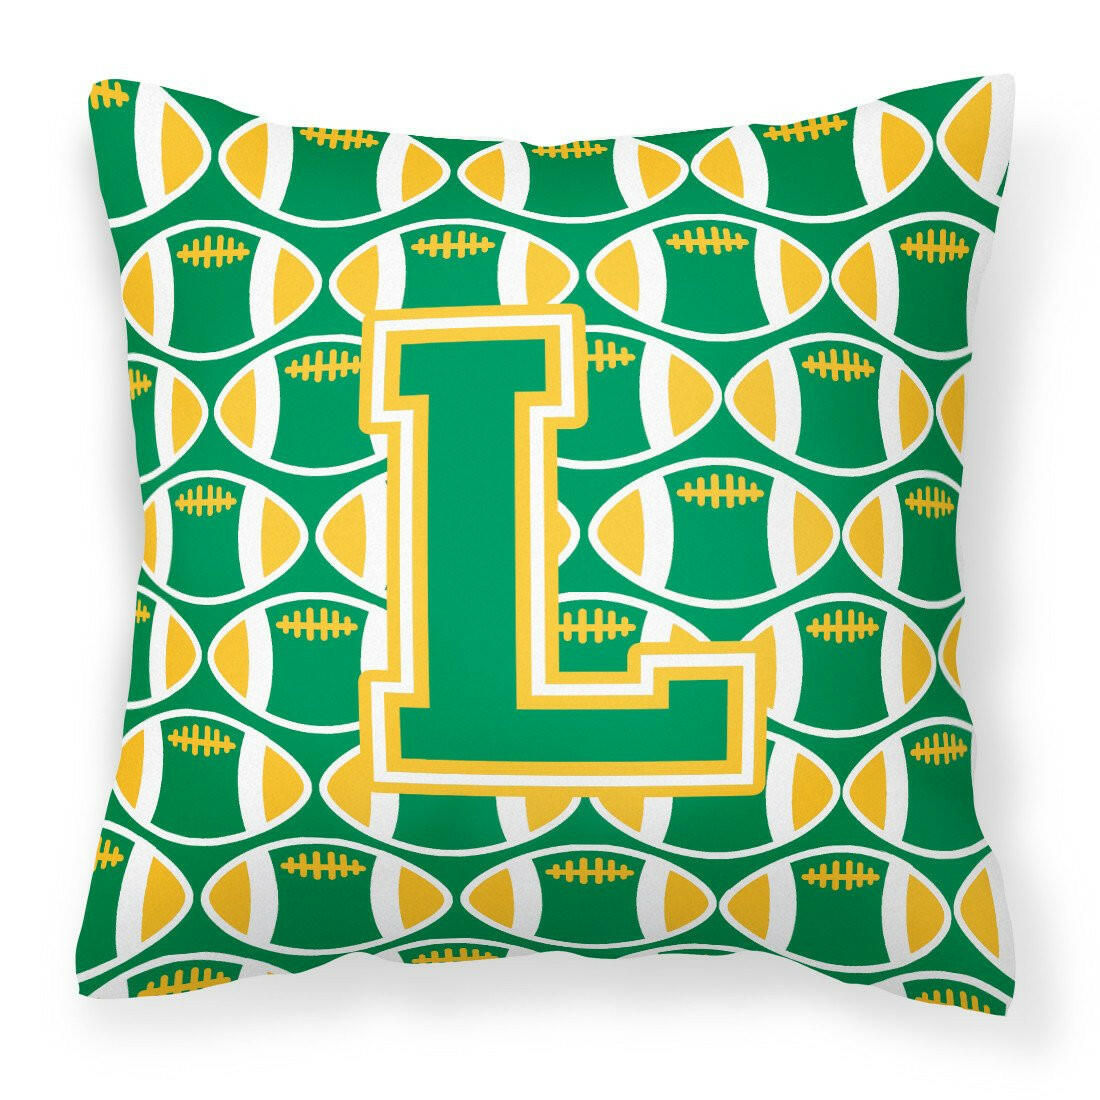 Letter L Football Green and Gold Fabric Decorative Pillow CJ1069-LPW1414 by Caroline's Treasures